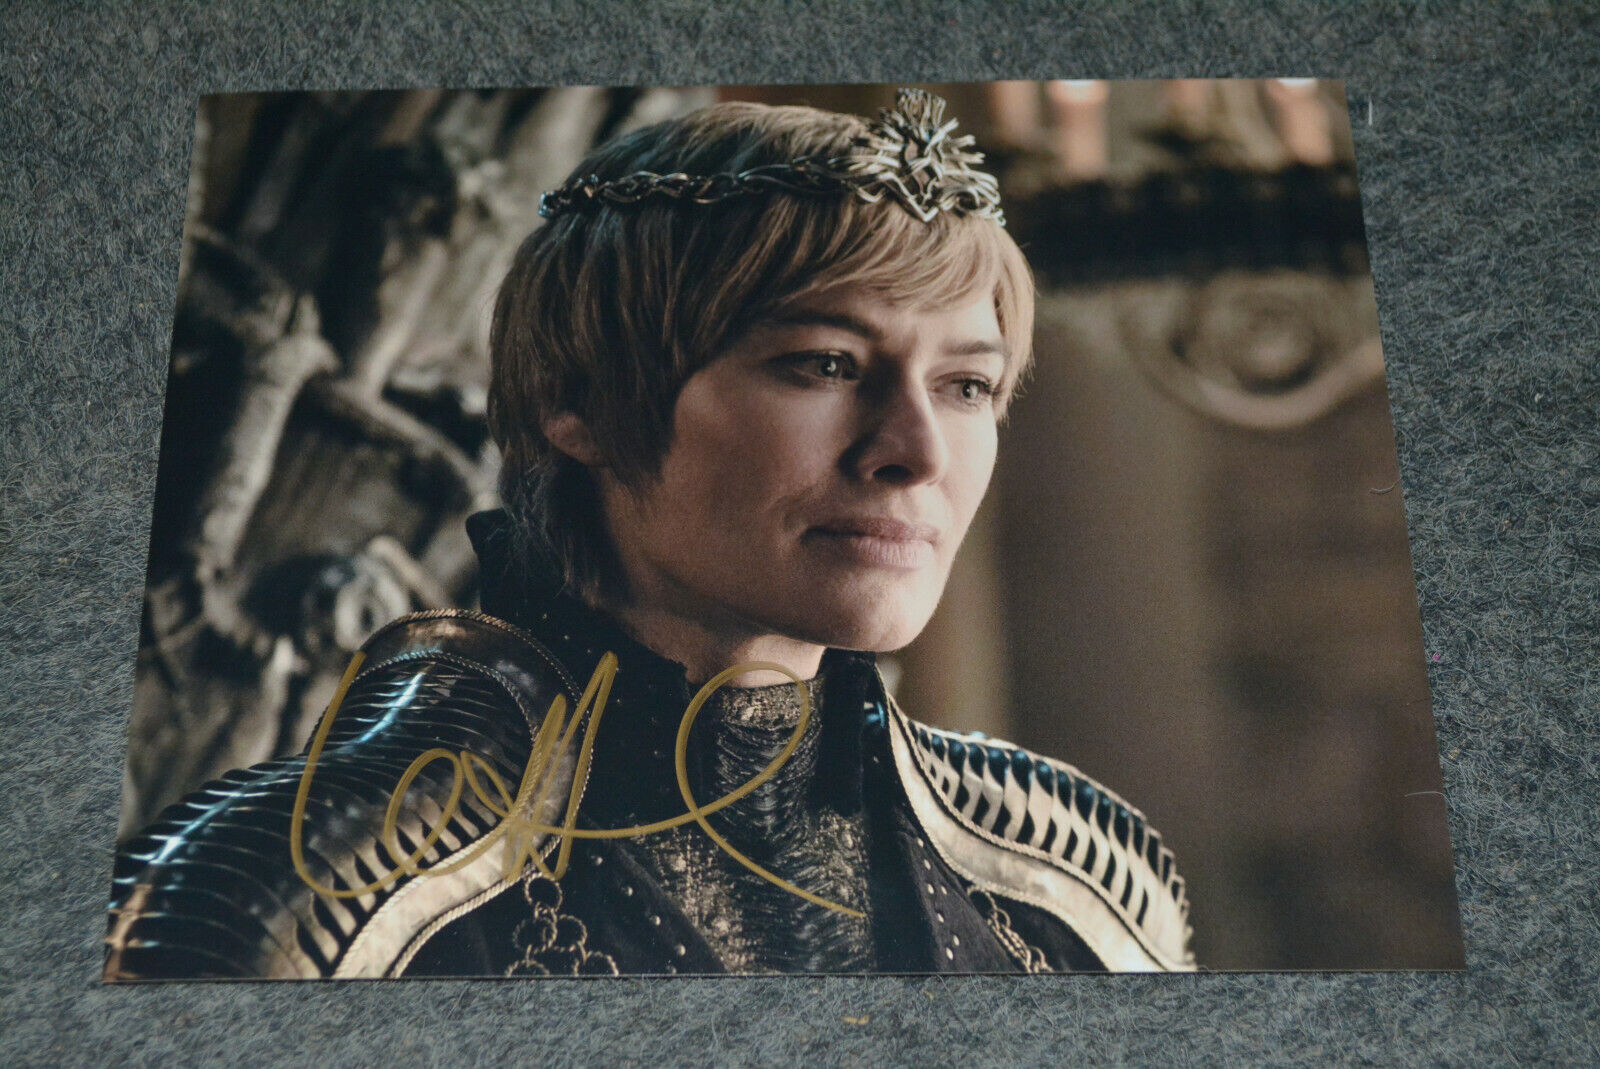 LENA HEADEY signed autograph In Person 8x10 20x25 cm GAME OF THRONES GOT